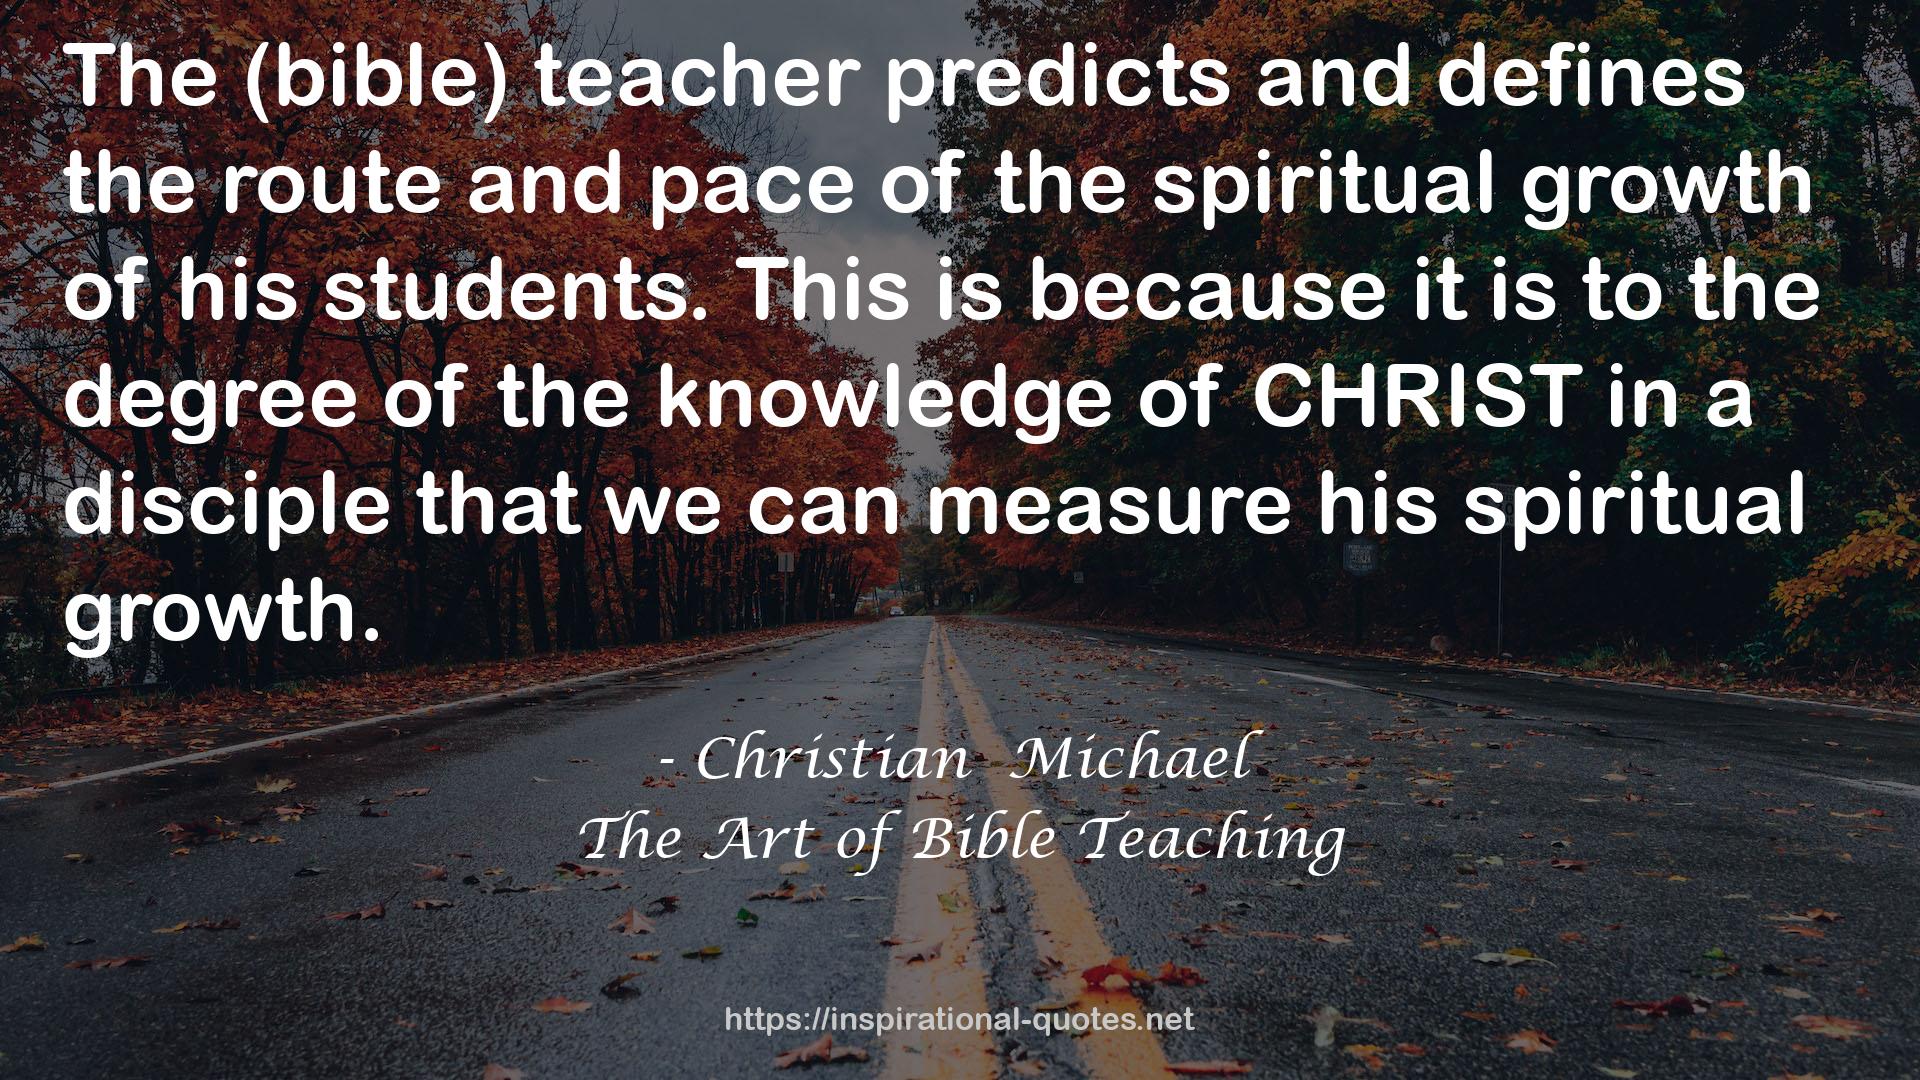 The Art of Bible Teaching QUOTES